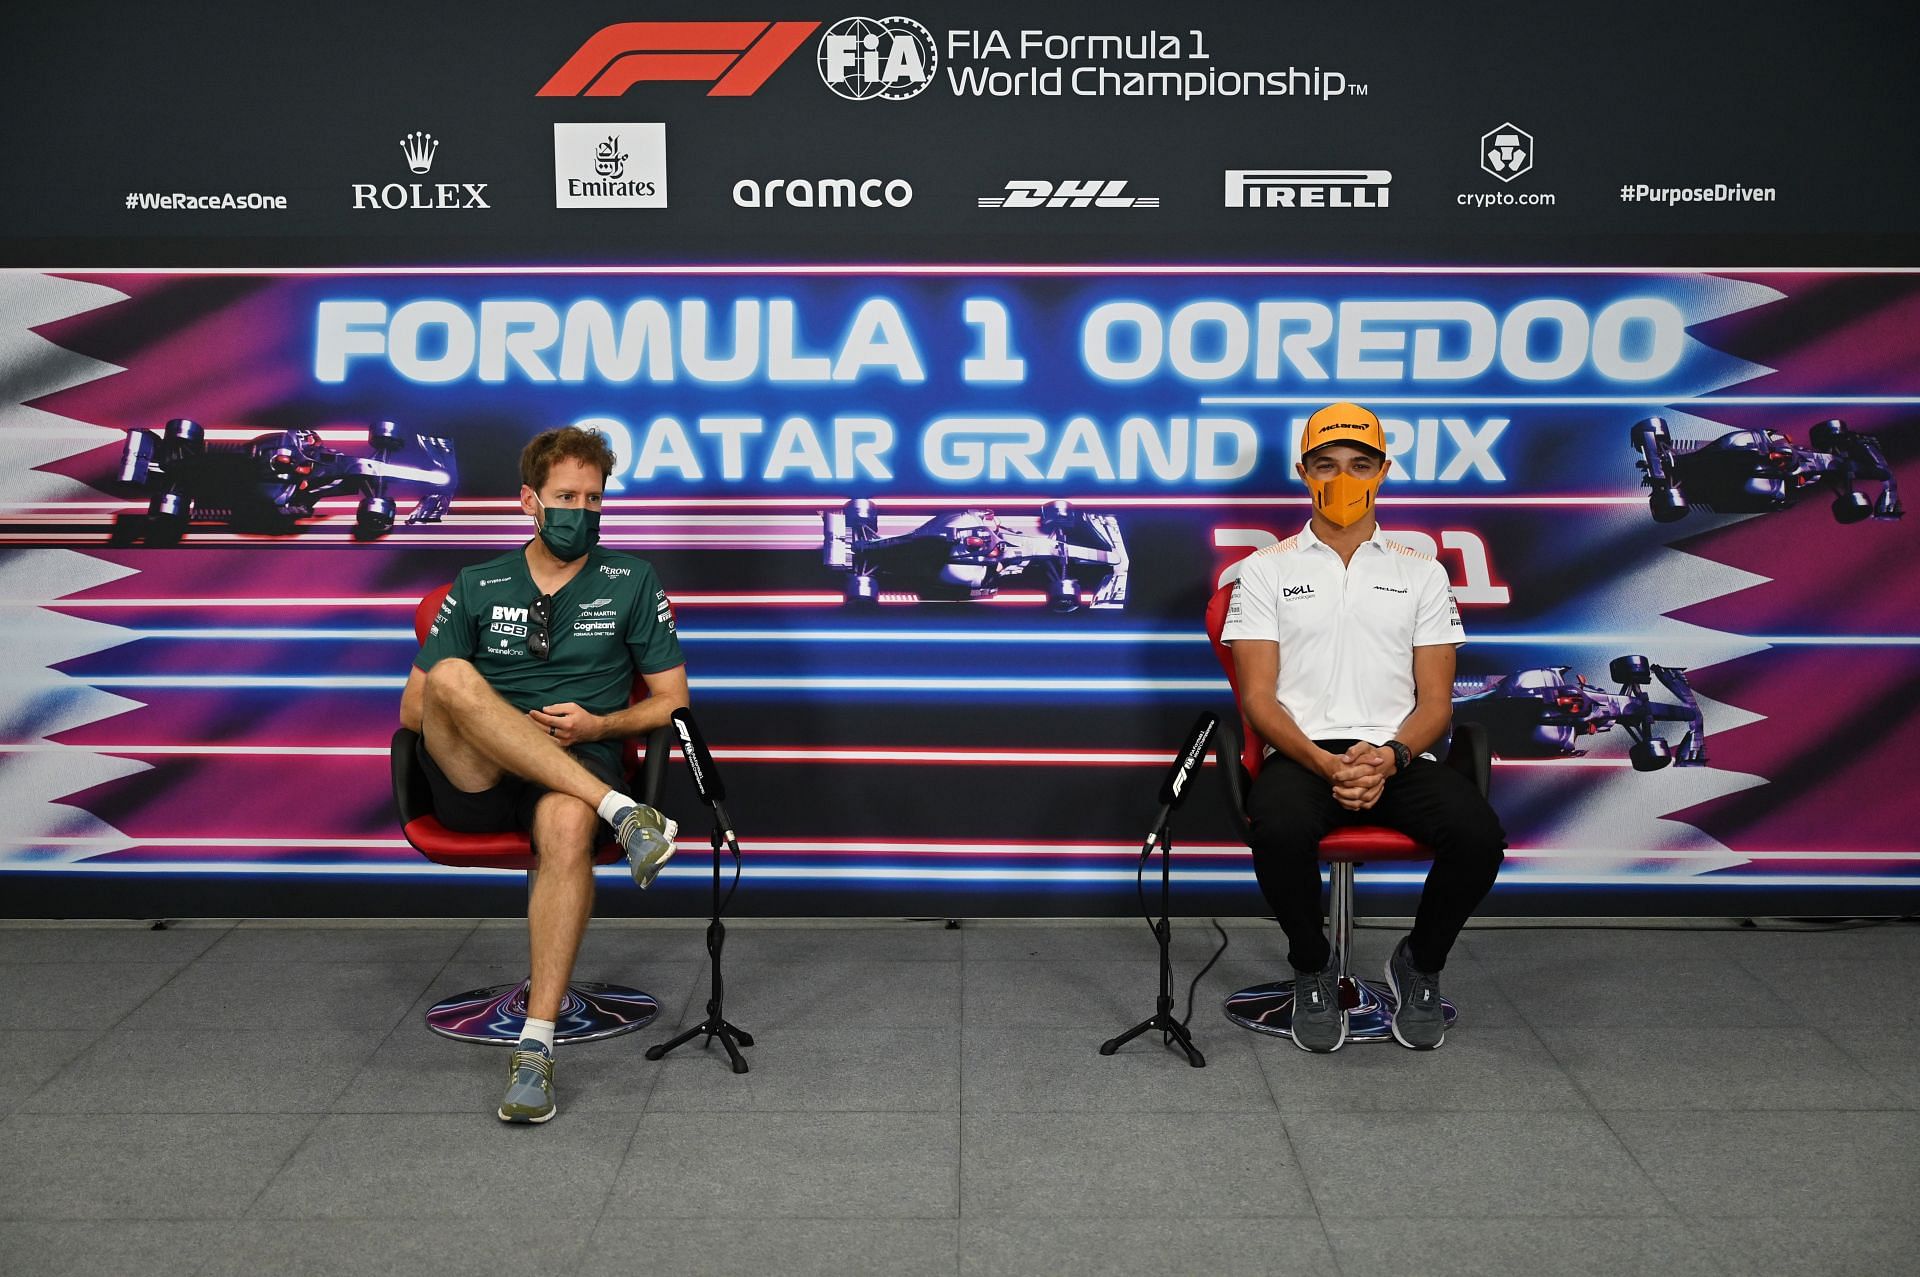 Sebastian Vettel and Lando Norris talk in the Drivers Press Conference during previews ahead of the F1 Grand Prix of Qatar. (Photo by Andrej Isakovic - Pool/Getty Images)